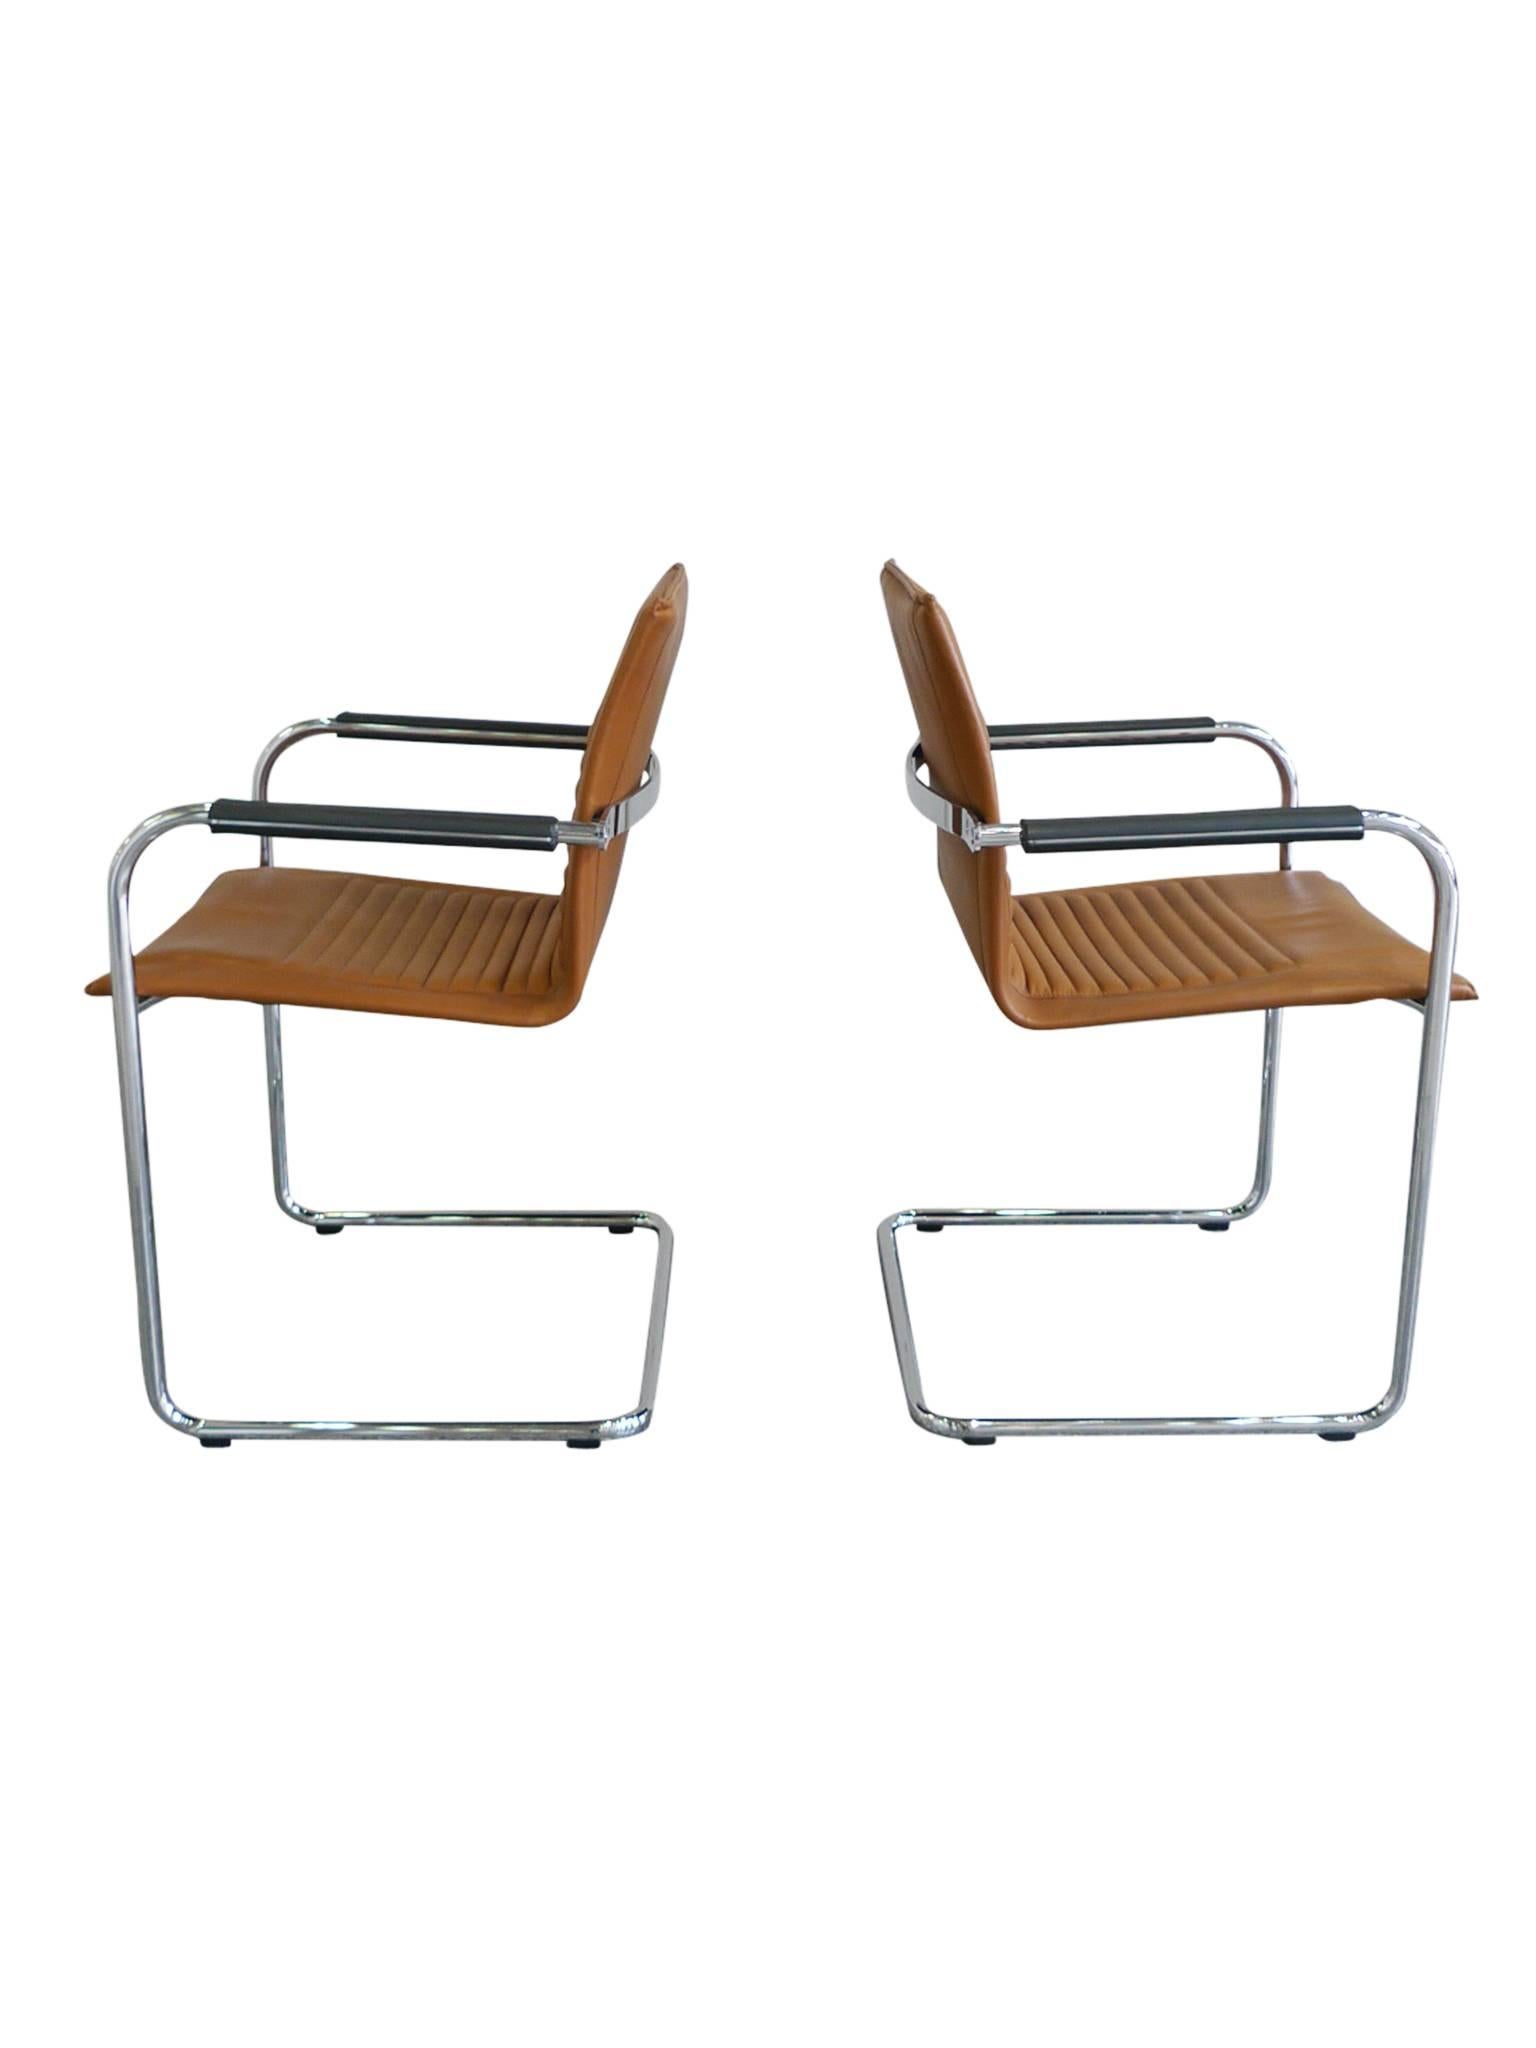 American Pair of Modern Tan Haworth Exchange Armchairs in the Style of Mart Stam